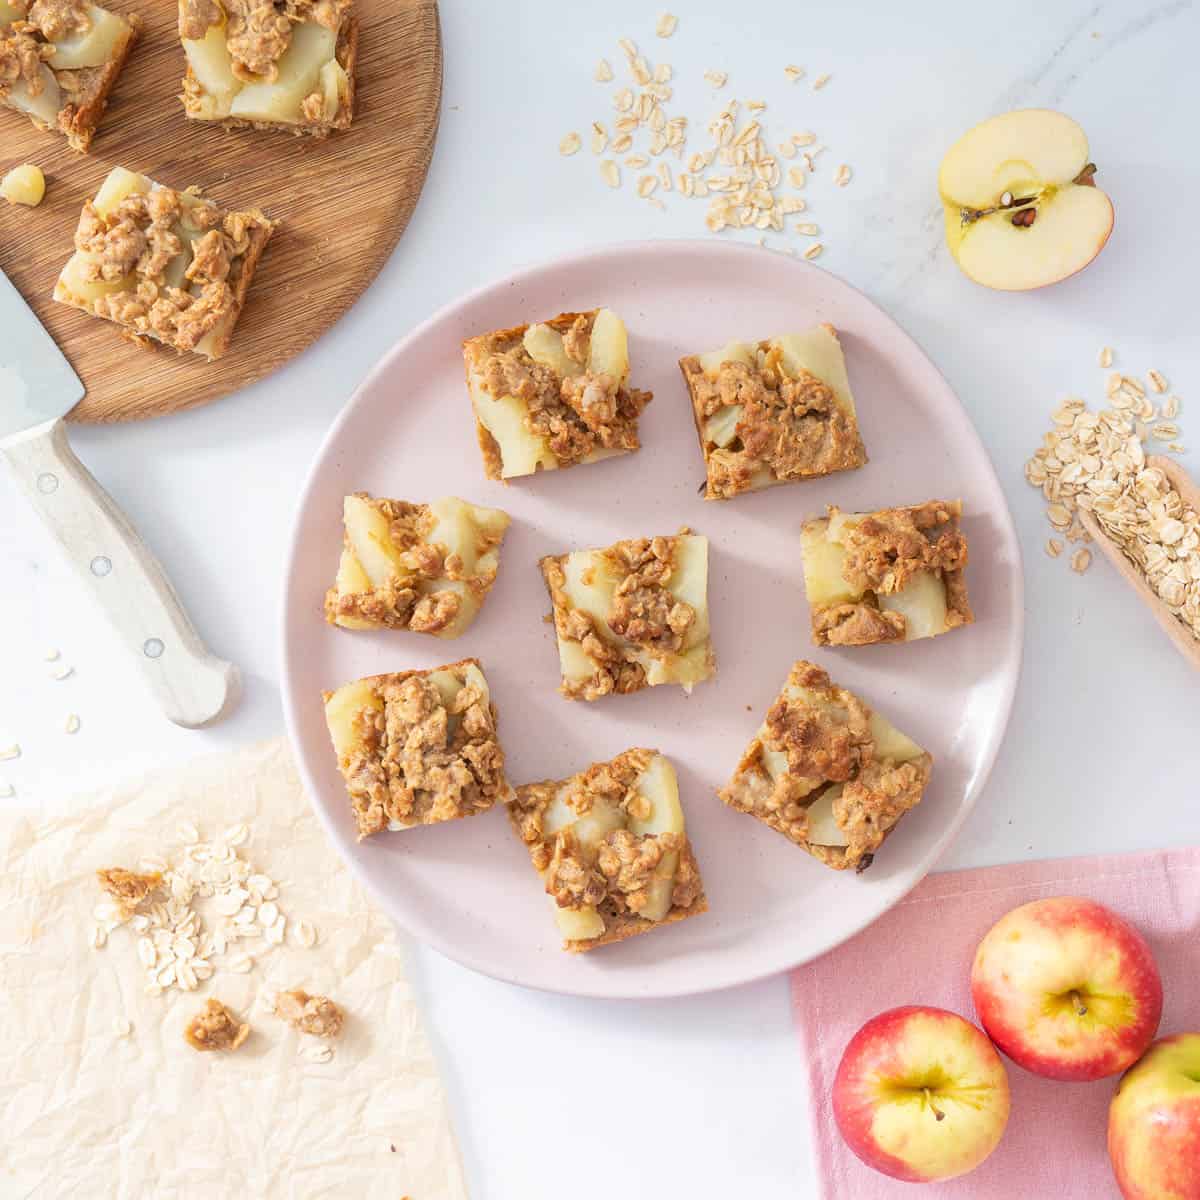 Eight pieces of apple slice on a pink plate surrounded by rolled oats and fresh apples on a bench top.